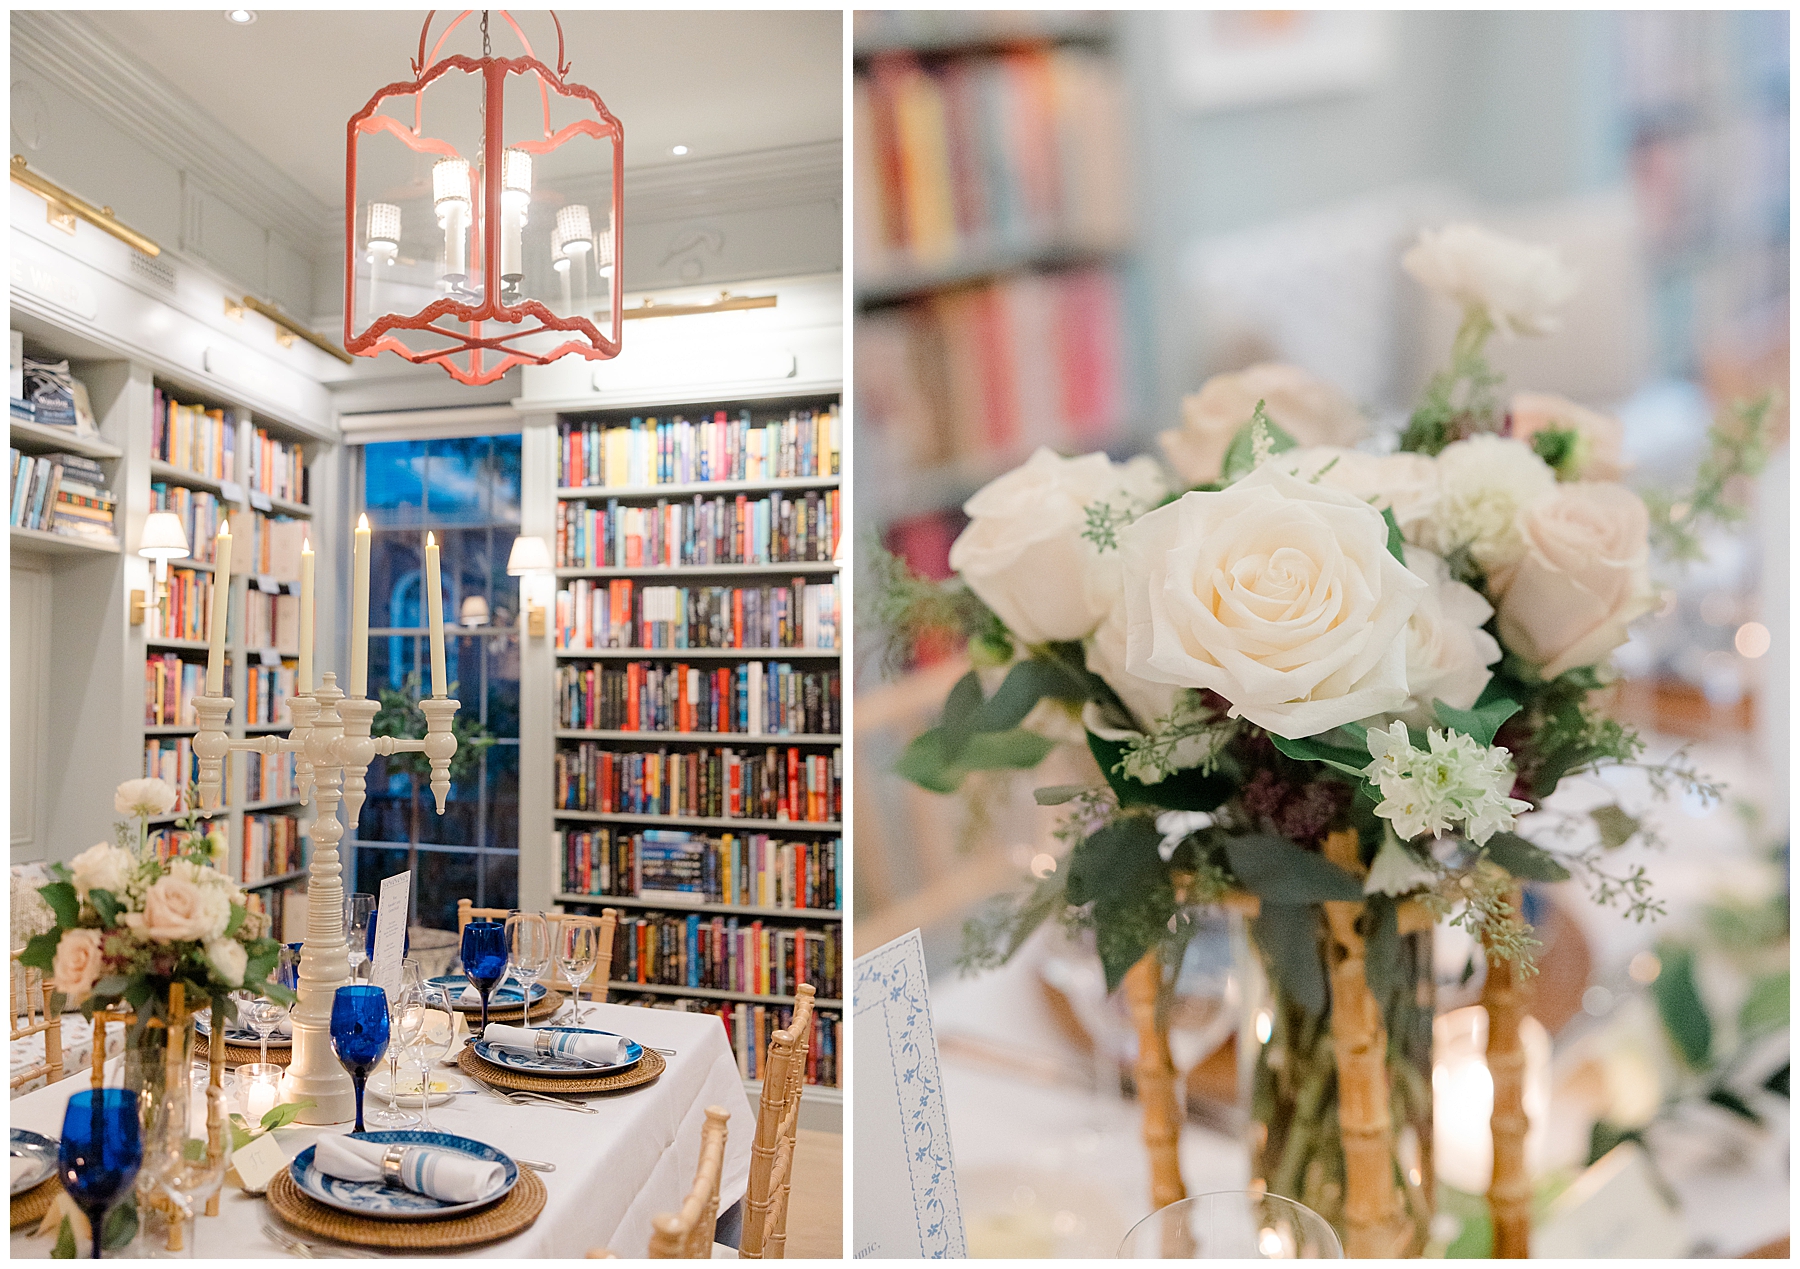 Intimate Boston Wedding details at Beacon Hill Books & Cafe 